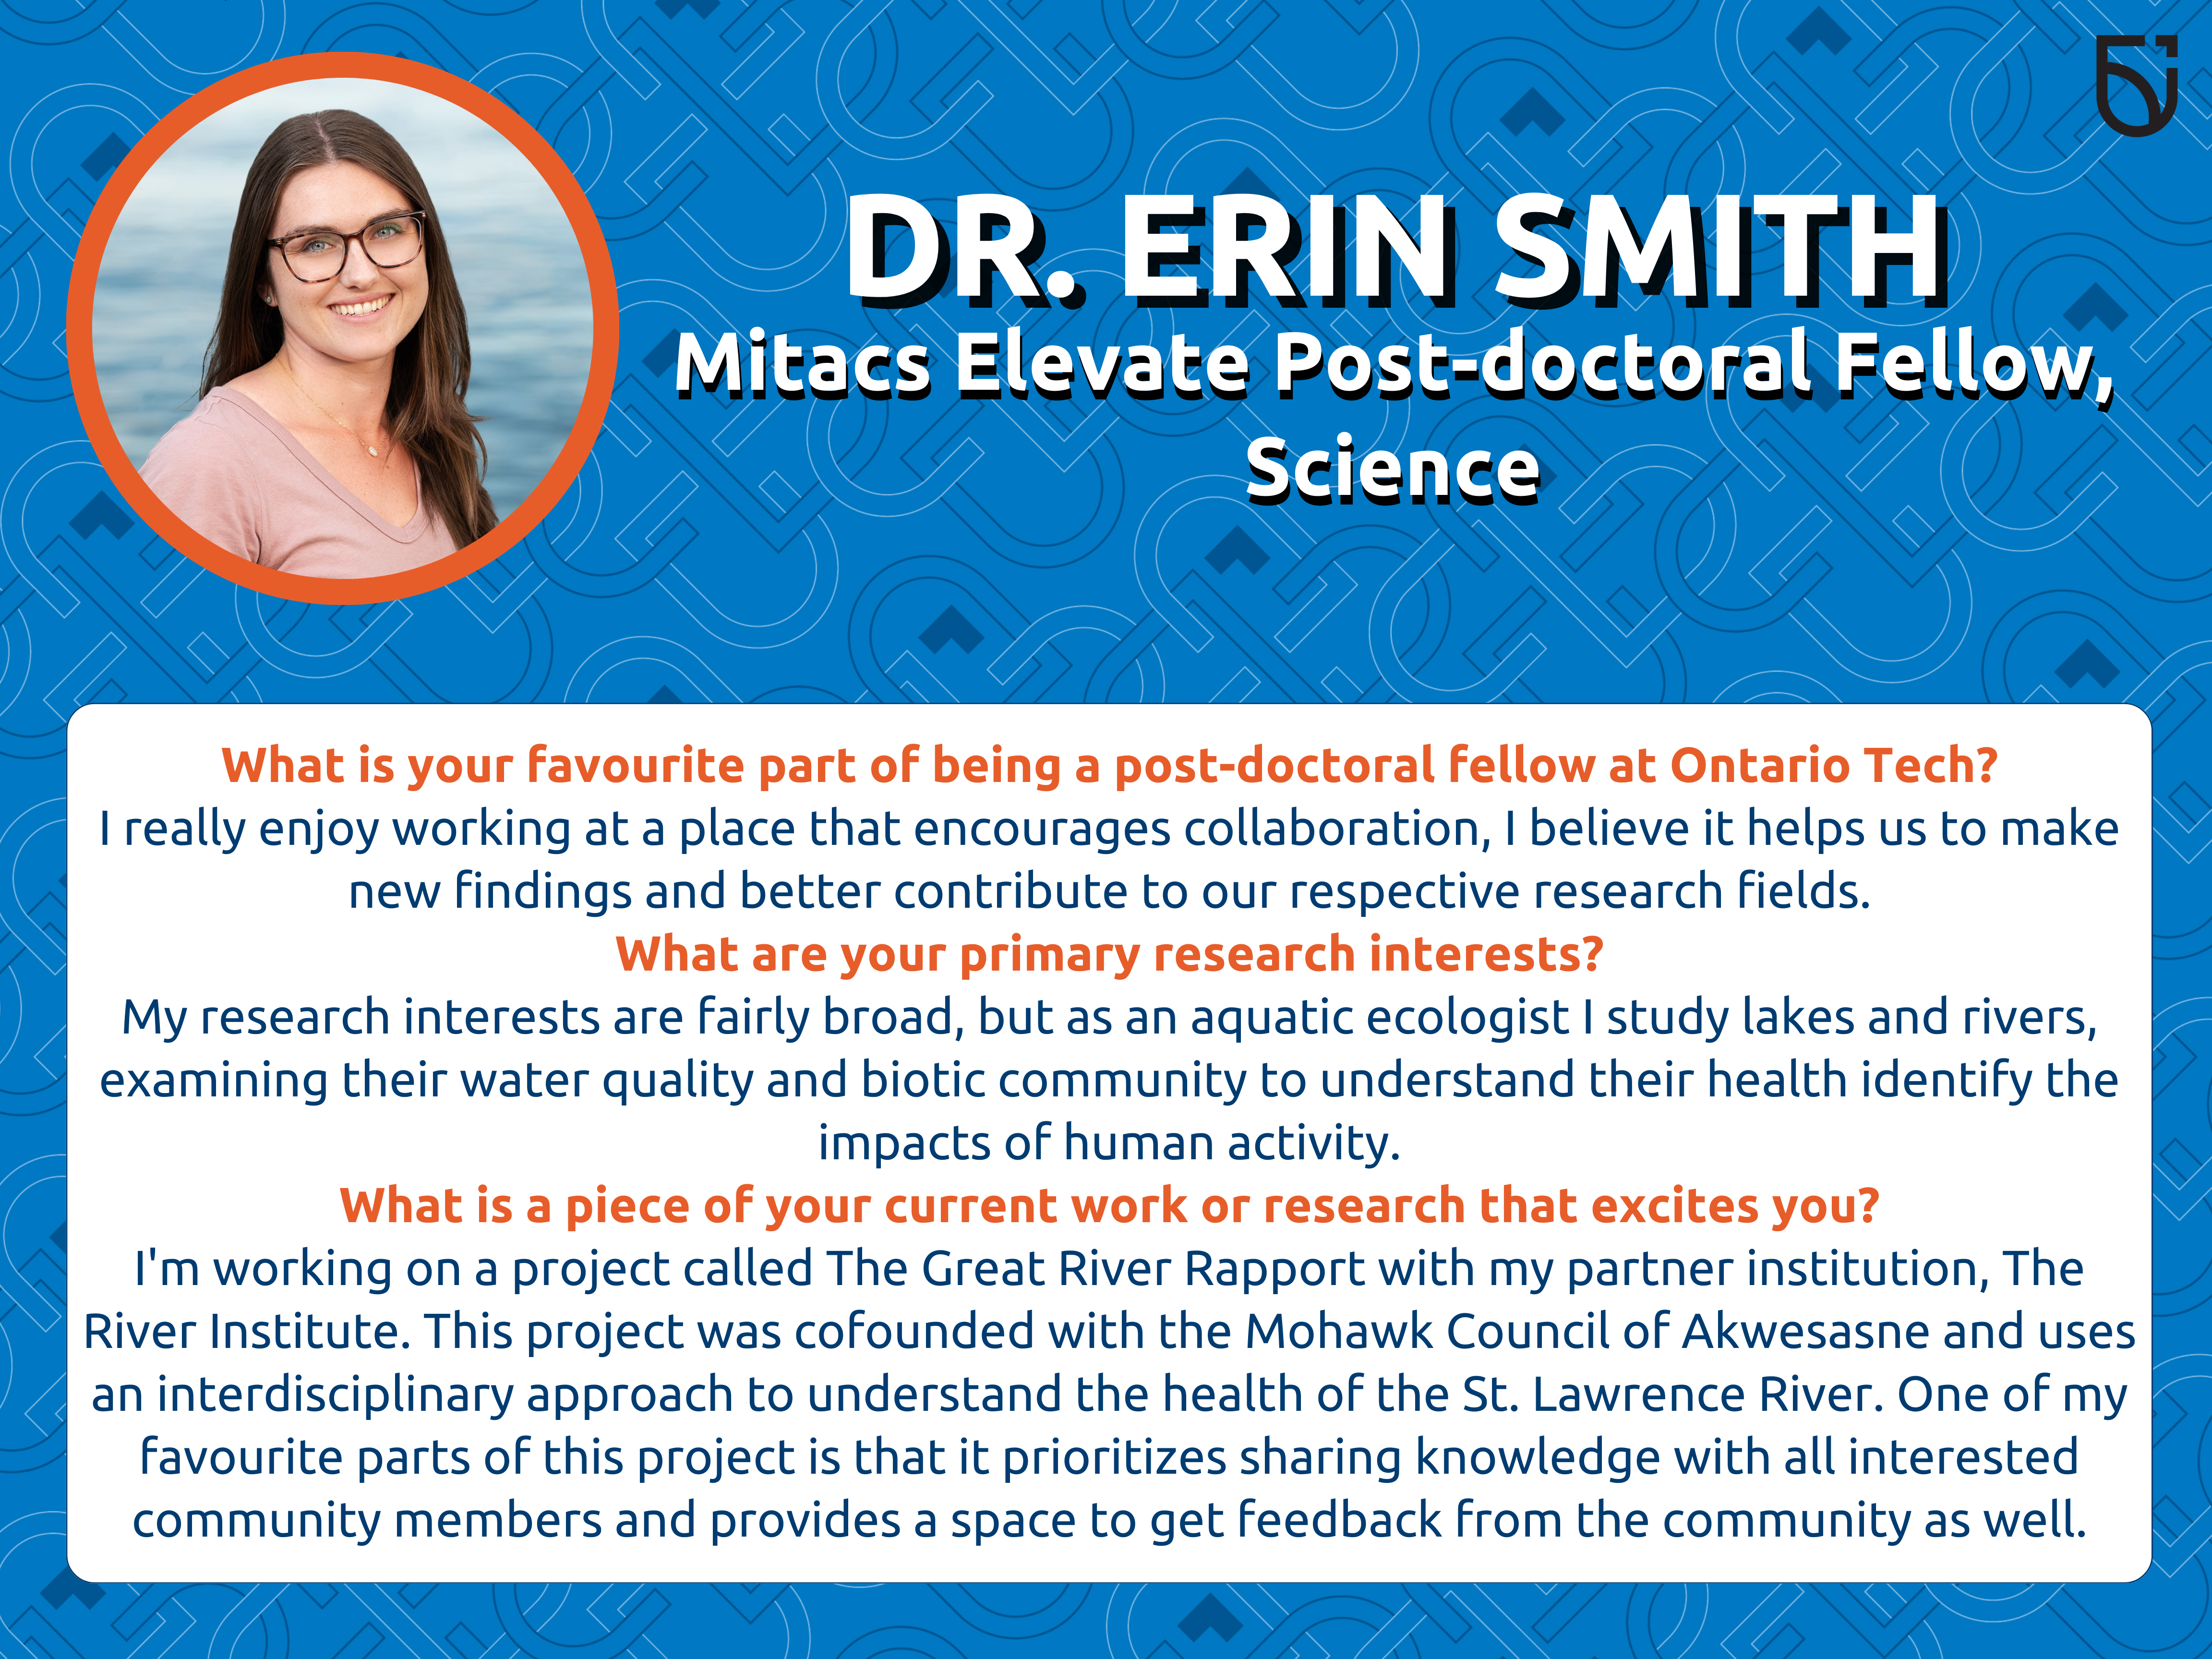 This photo is a Women’s Wednesday feature of Dr. Erin Smith, a Mitacs Elevate Post-doctoral Fellow in the Faculty of Science.